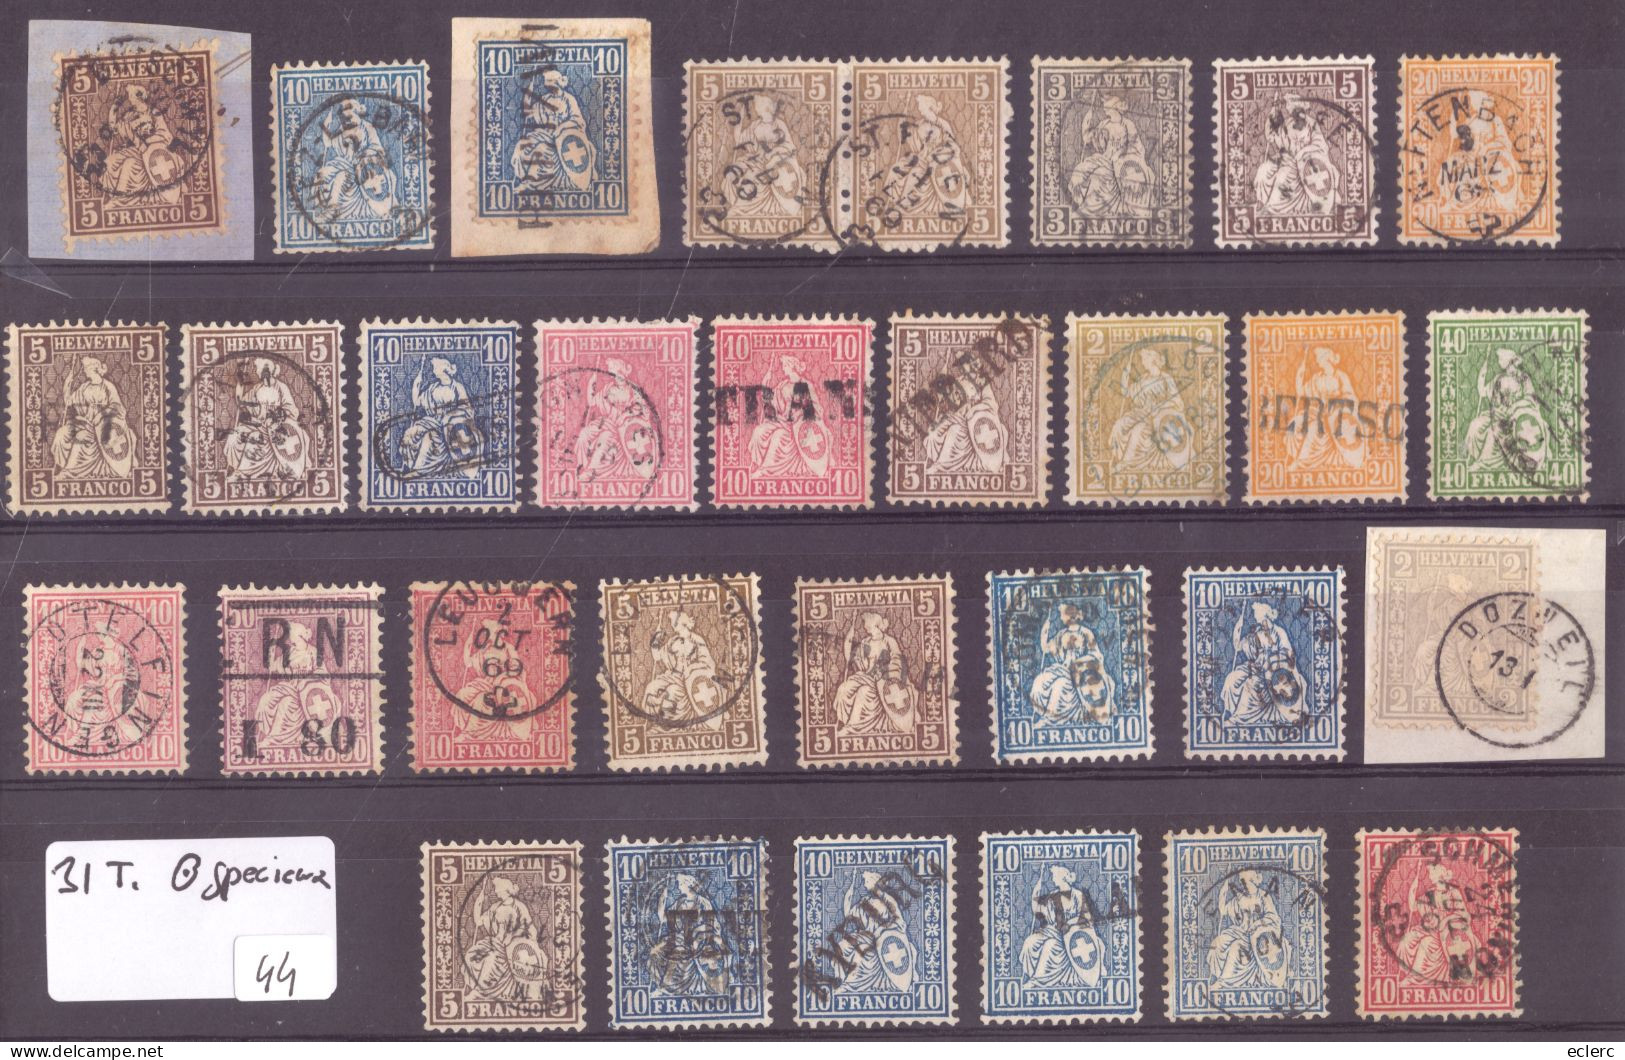 31 HELVETIES ASSISES DENTELES - OBLITERATIONS SPECIALES, LINEAIRES, SANS ANNEE, DES A COUDRE... - Used Stamps